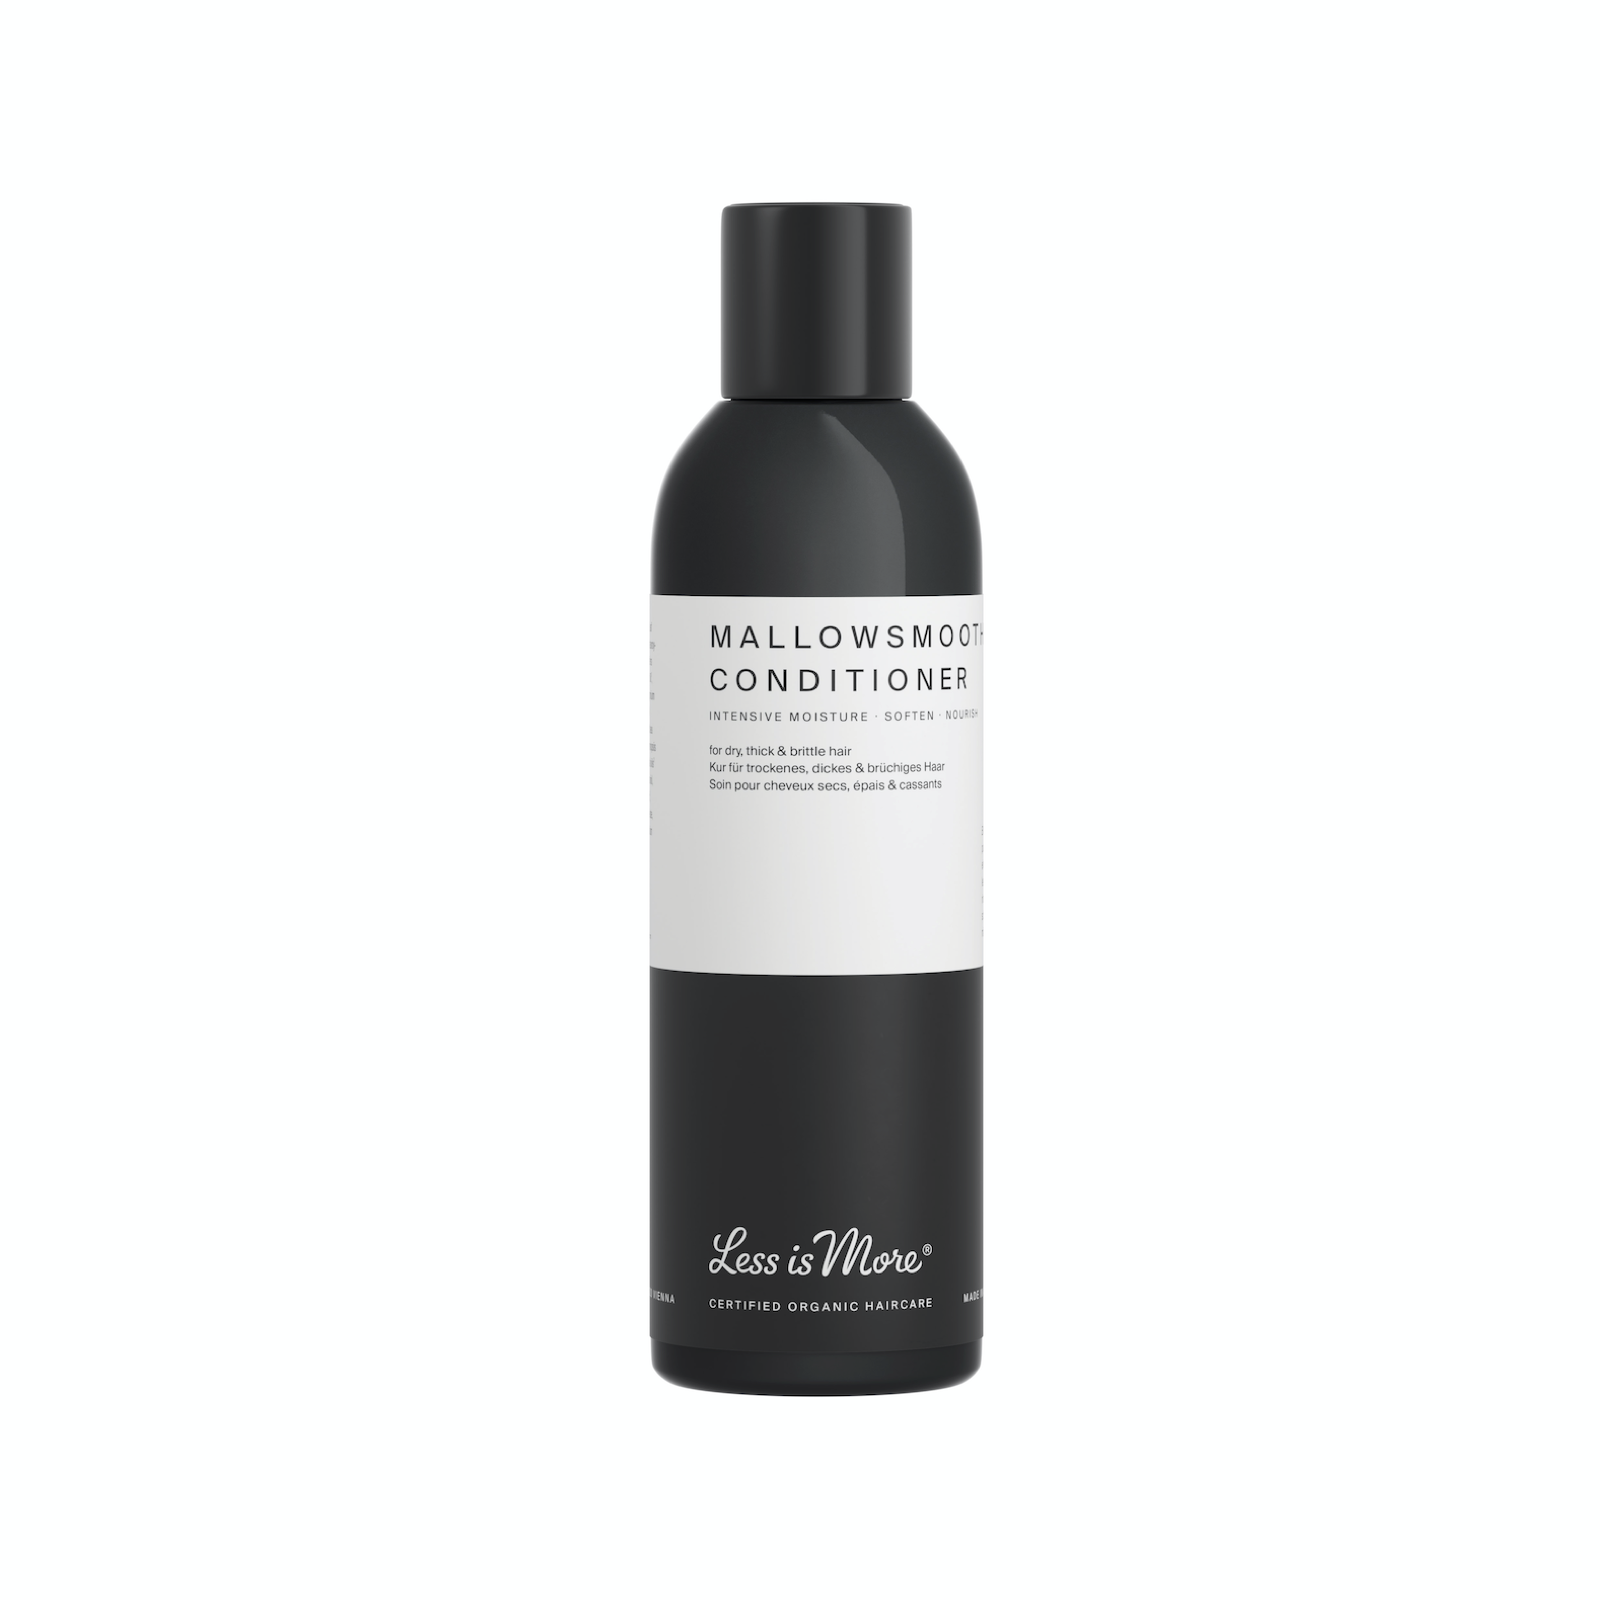 Mallowsmooth Conditioner 200 ml from Less Is More